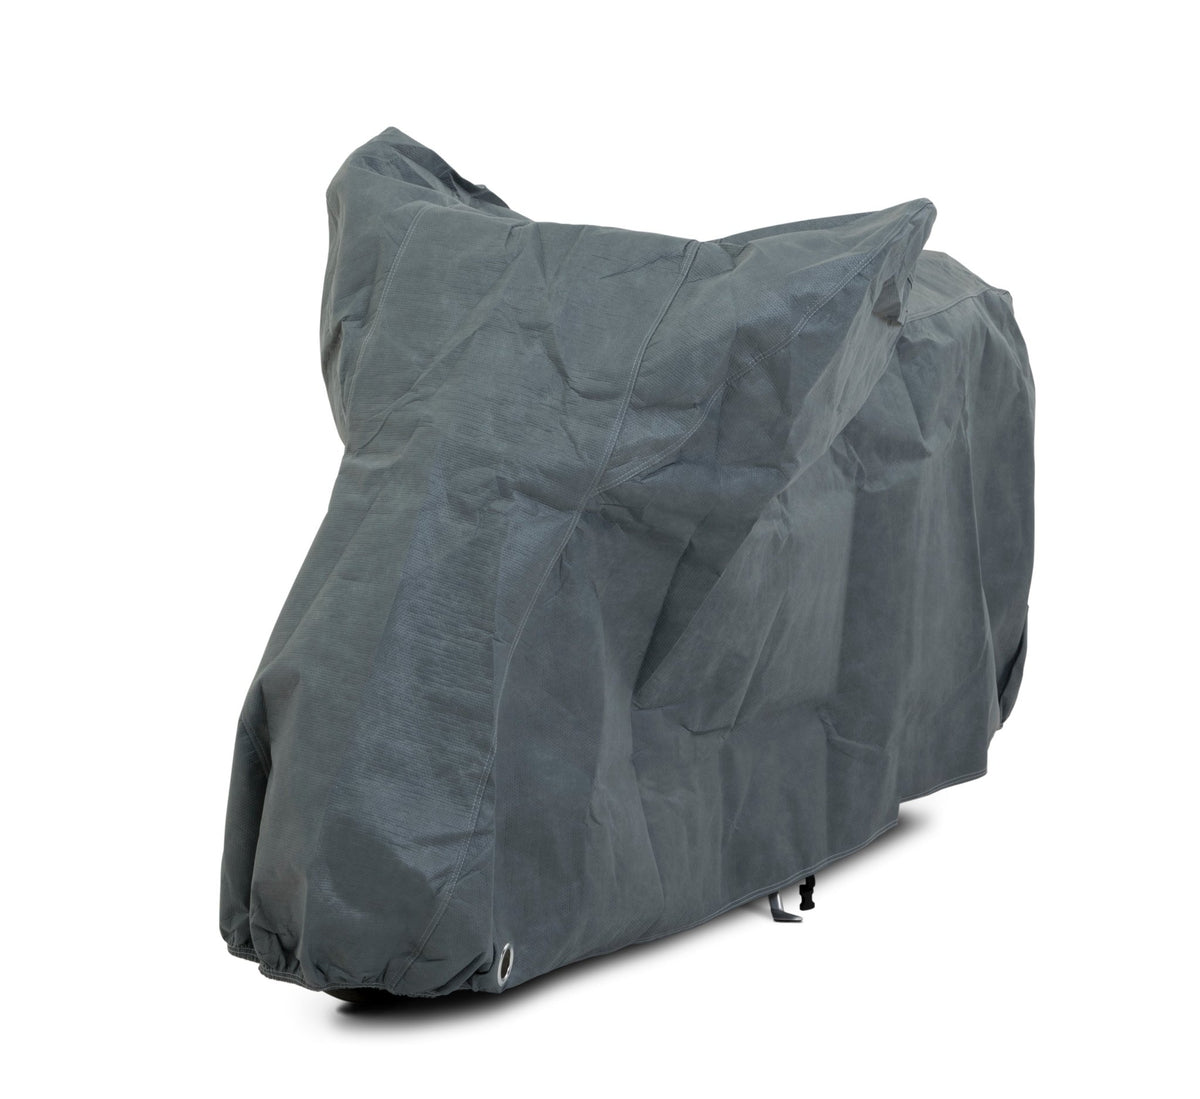 Stormforce best outdoor motorcycle covers for KYMCO - Storm Motorcycle Covers